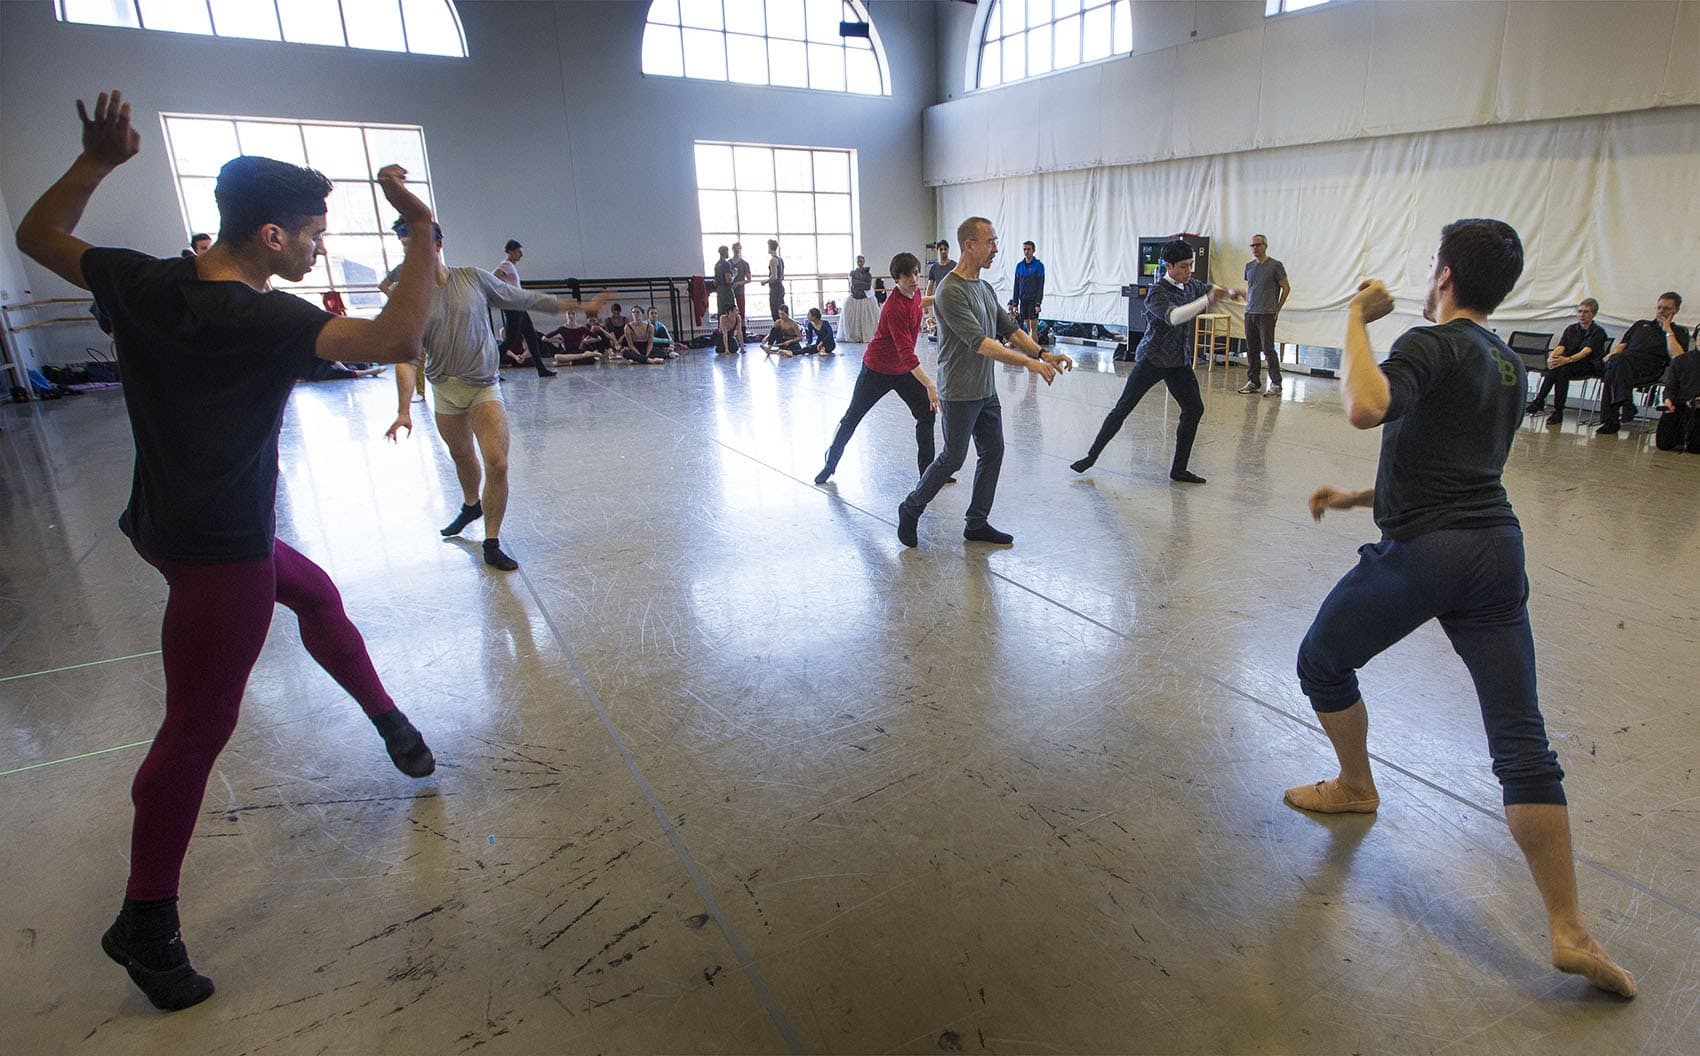 Forsythe guides the dancers through a rehearsal. (Jesse Costa/WBUR)